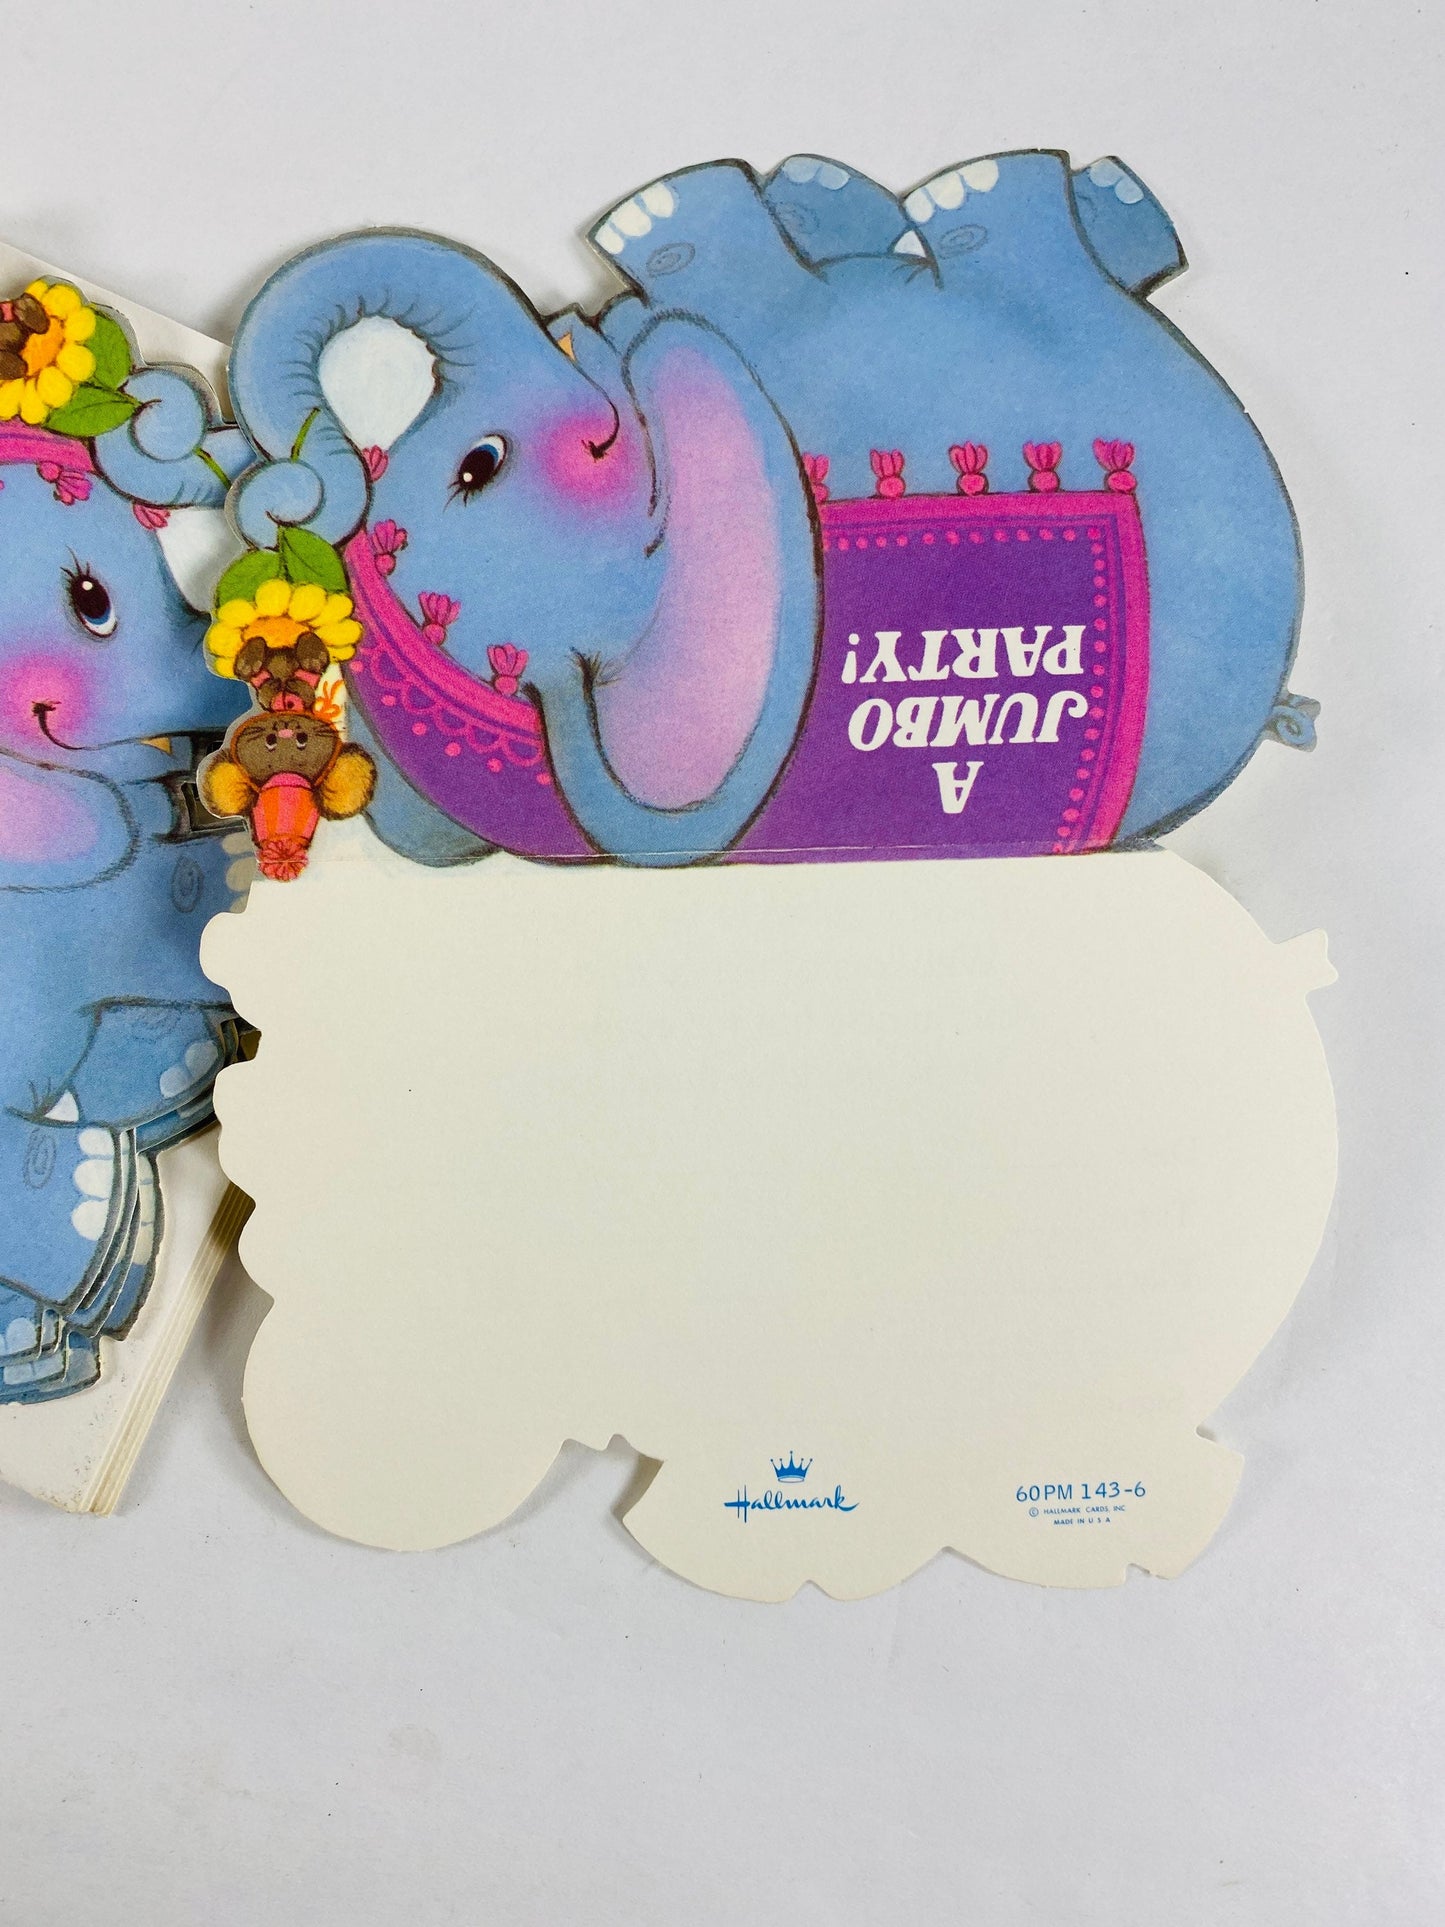 Vintage blue elephant & mouse Hallmark party invitation cards circa 1979. Lot of 4 unused cards with envelopes.